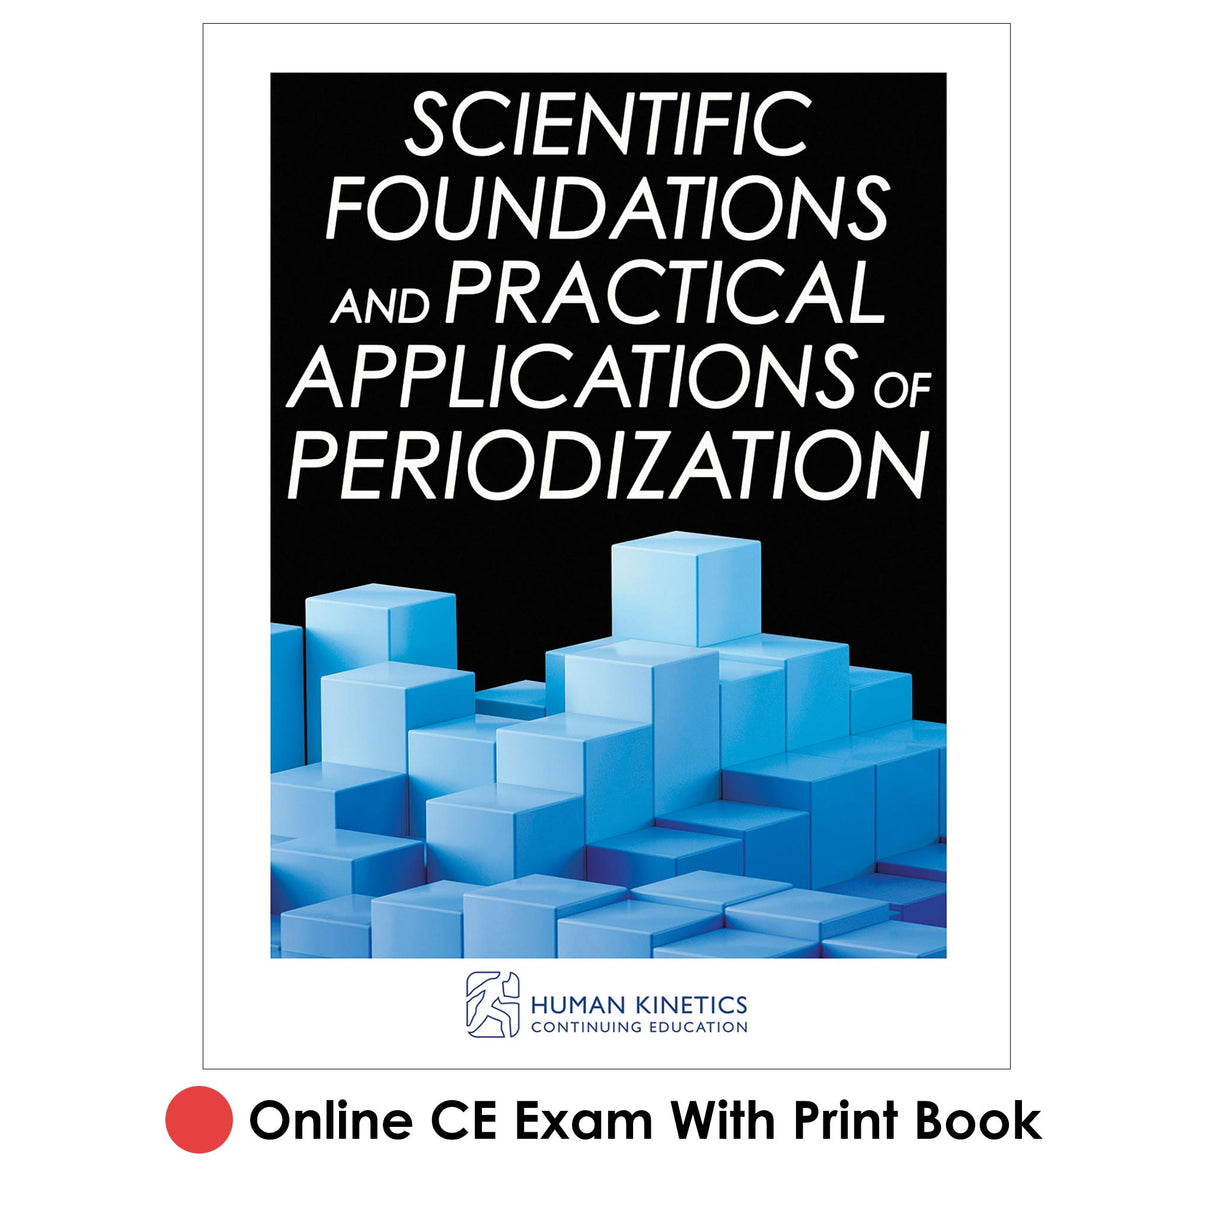 Scientific Foundations and Practical Applications of Periodization Online CE Exam With Print Book